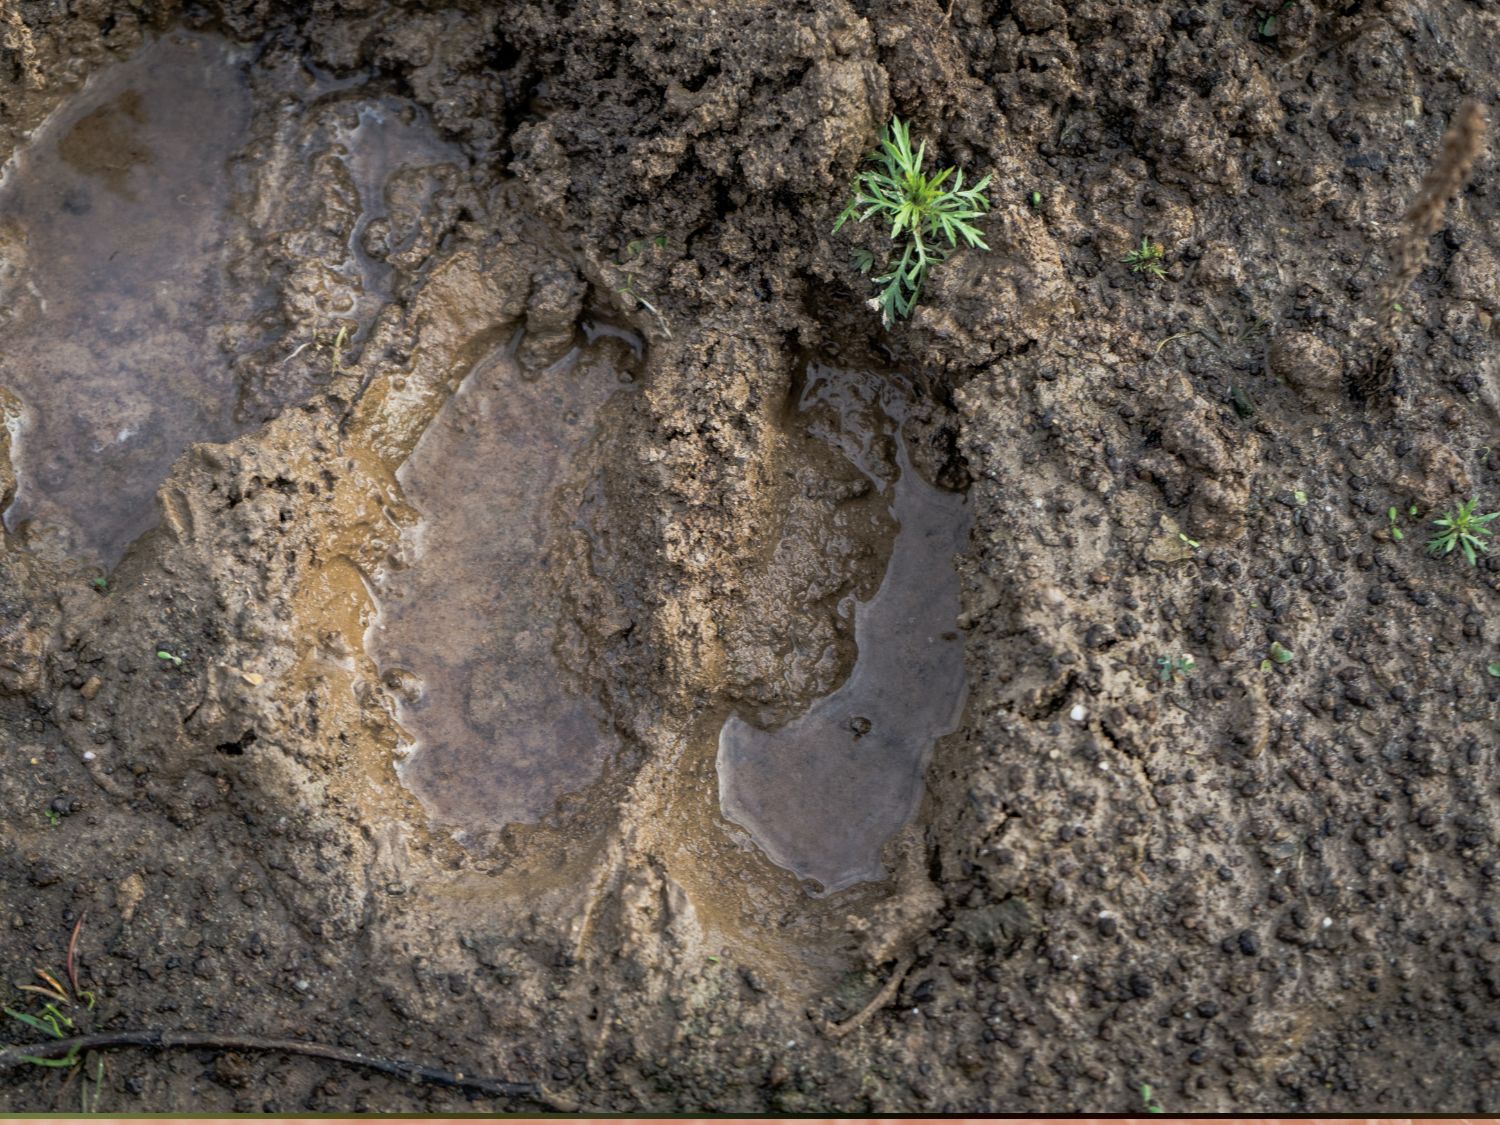 A close up photo of deer hoof prints in the earth